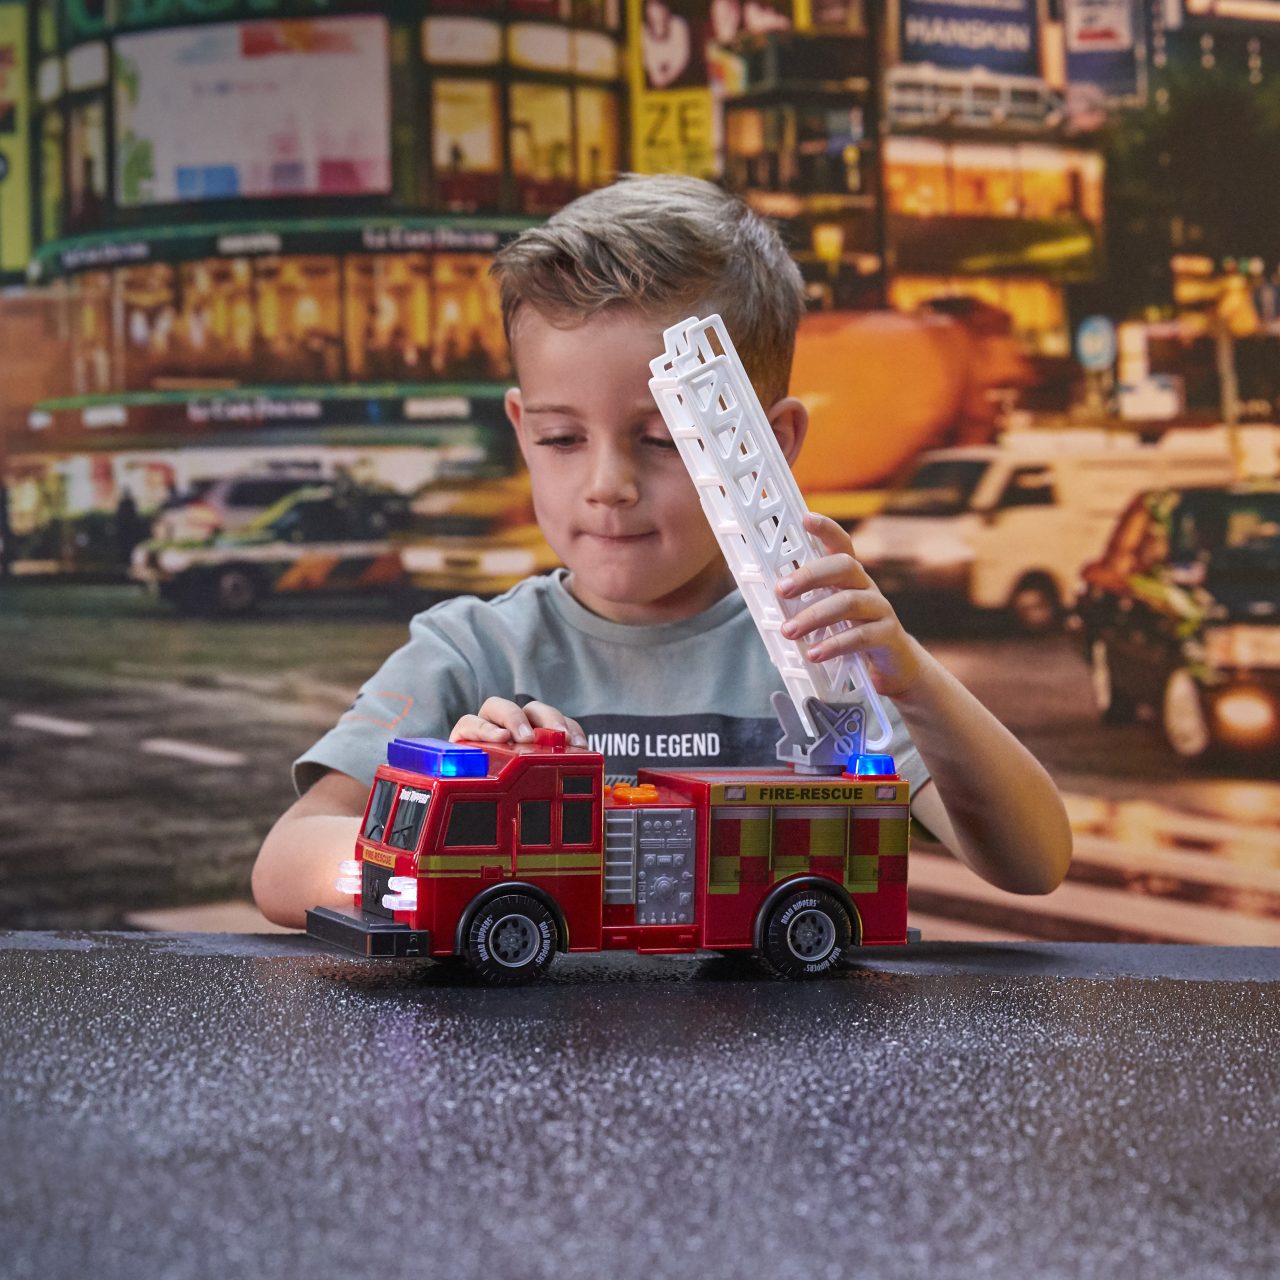 Nikko UK Rush and Rescue 12" - 30 cm Fire Truck. Young boy playing with the toy.